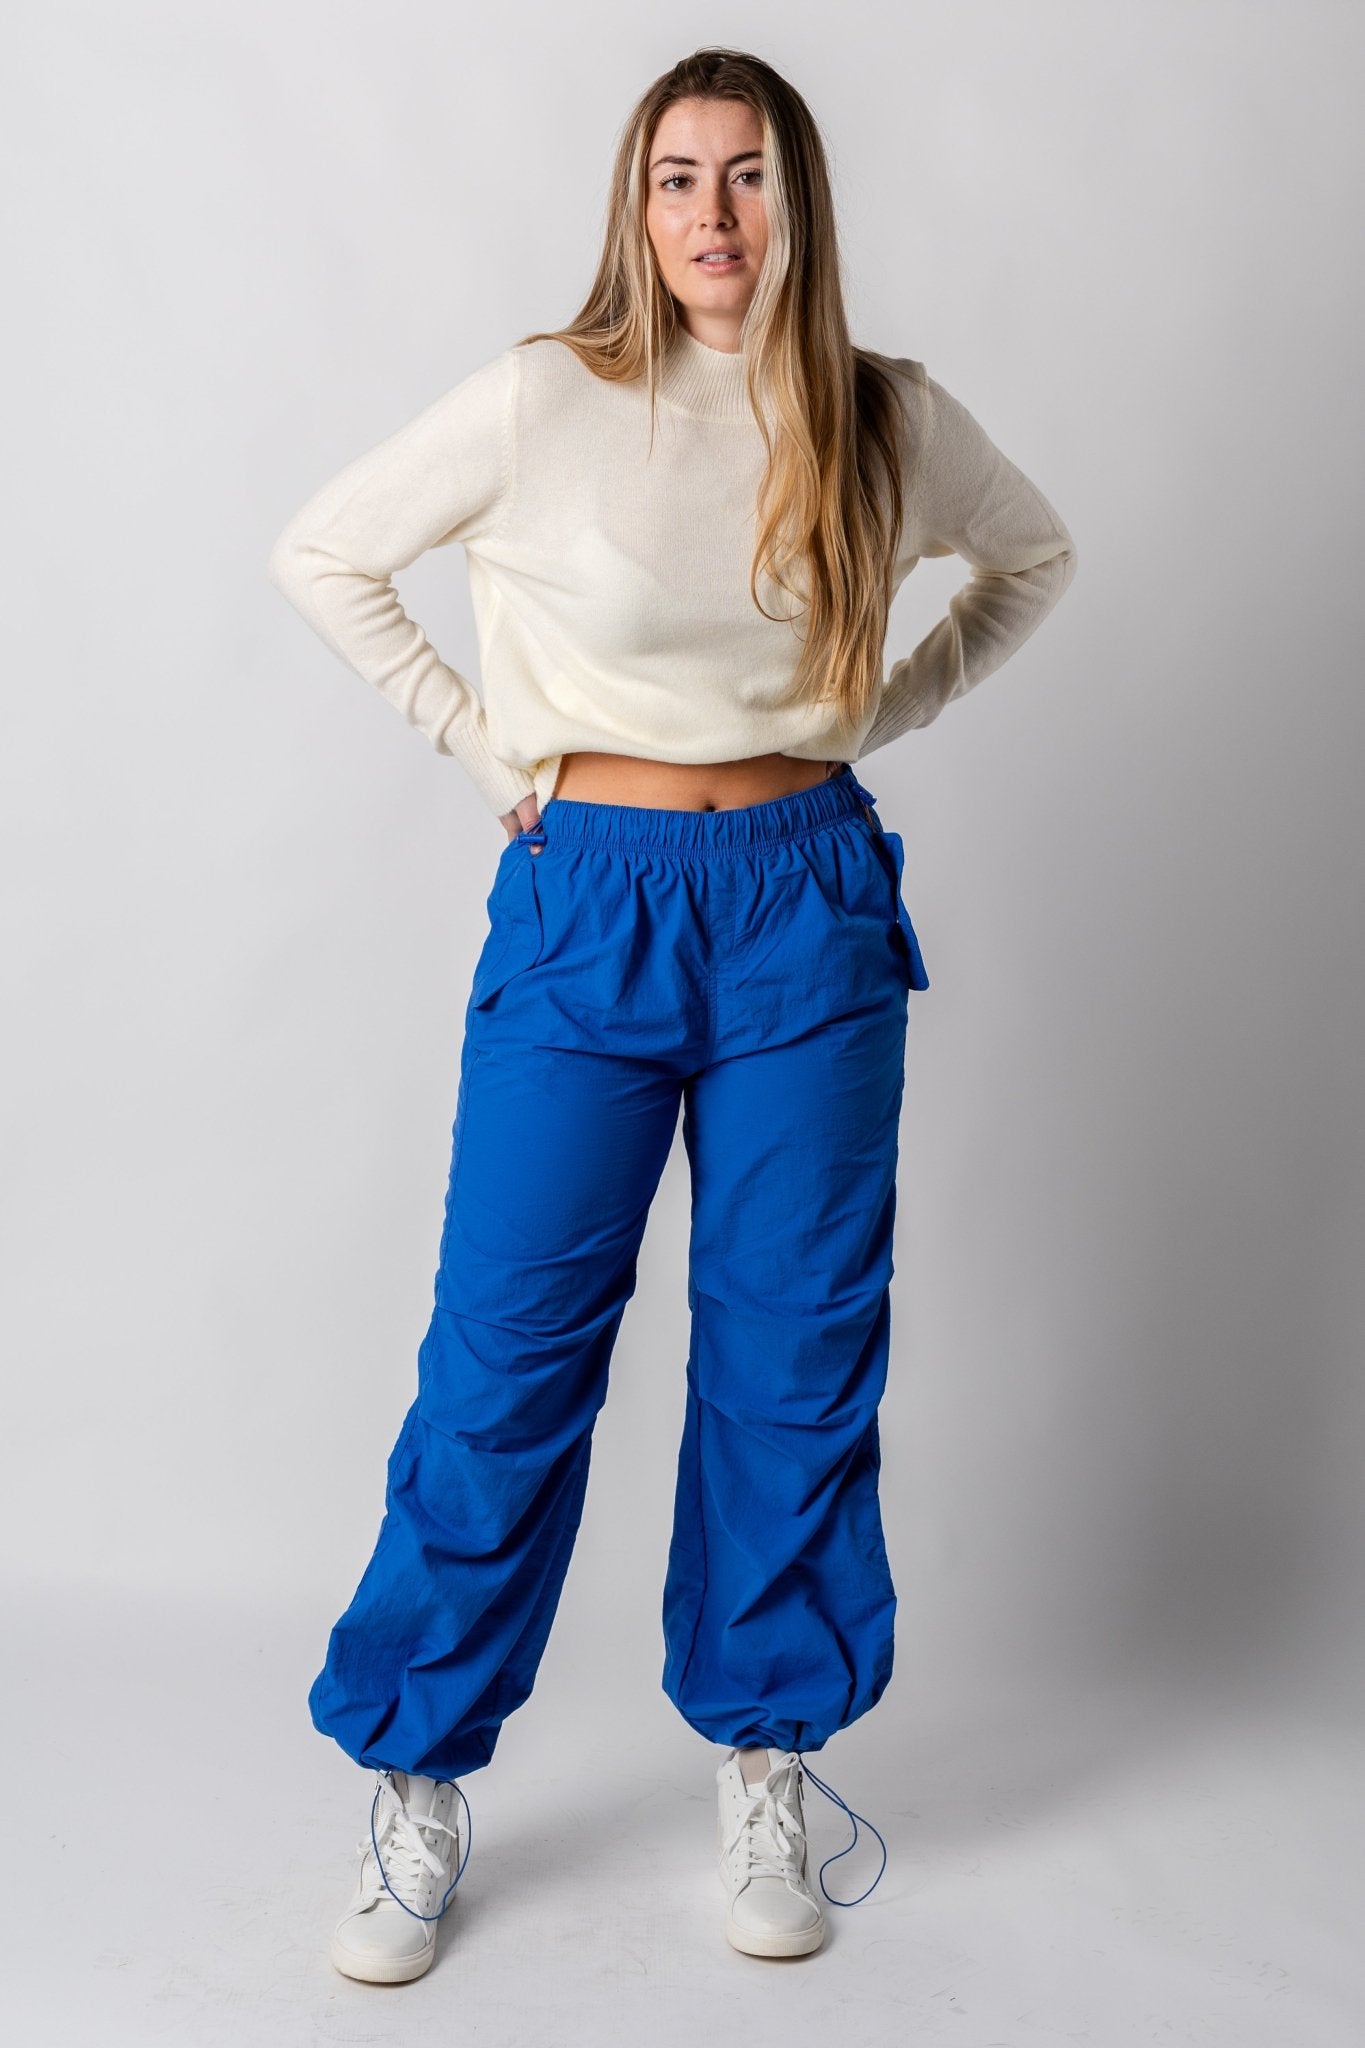 Ruched cargo pants azure - Oklahoma City inspired graphic t-shirts at Lush Fashion Lounge Boutique in Oklahoma City